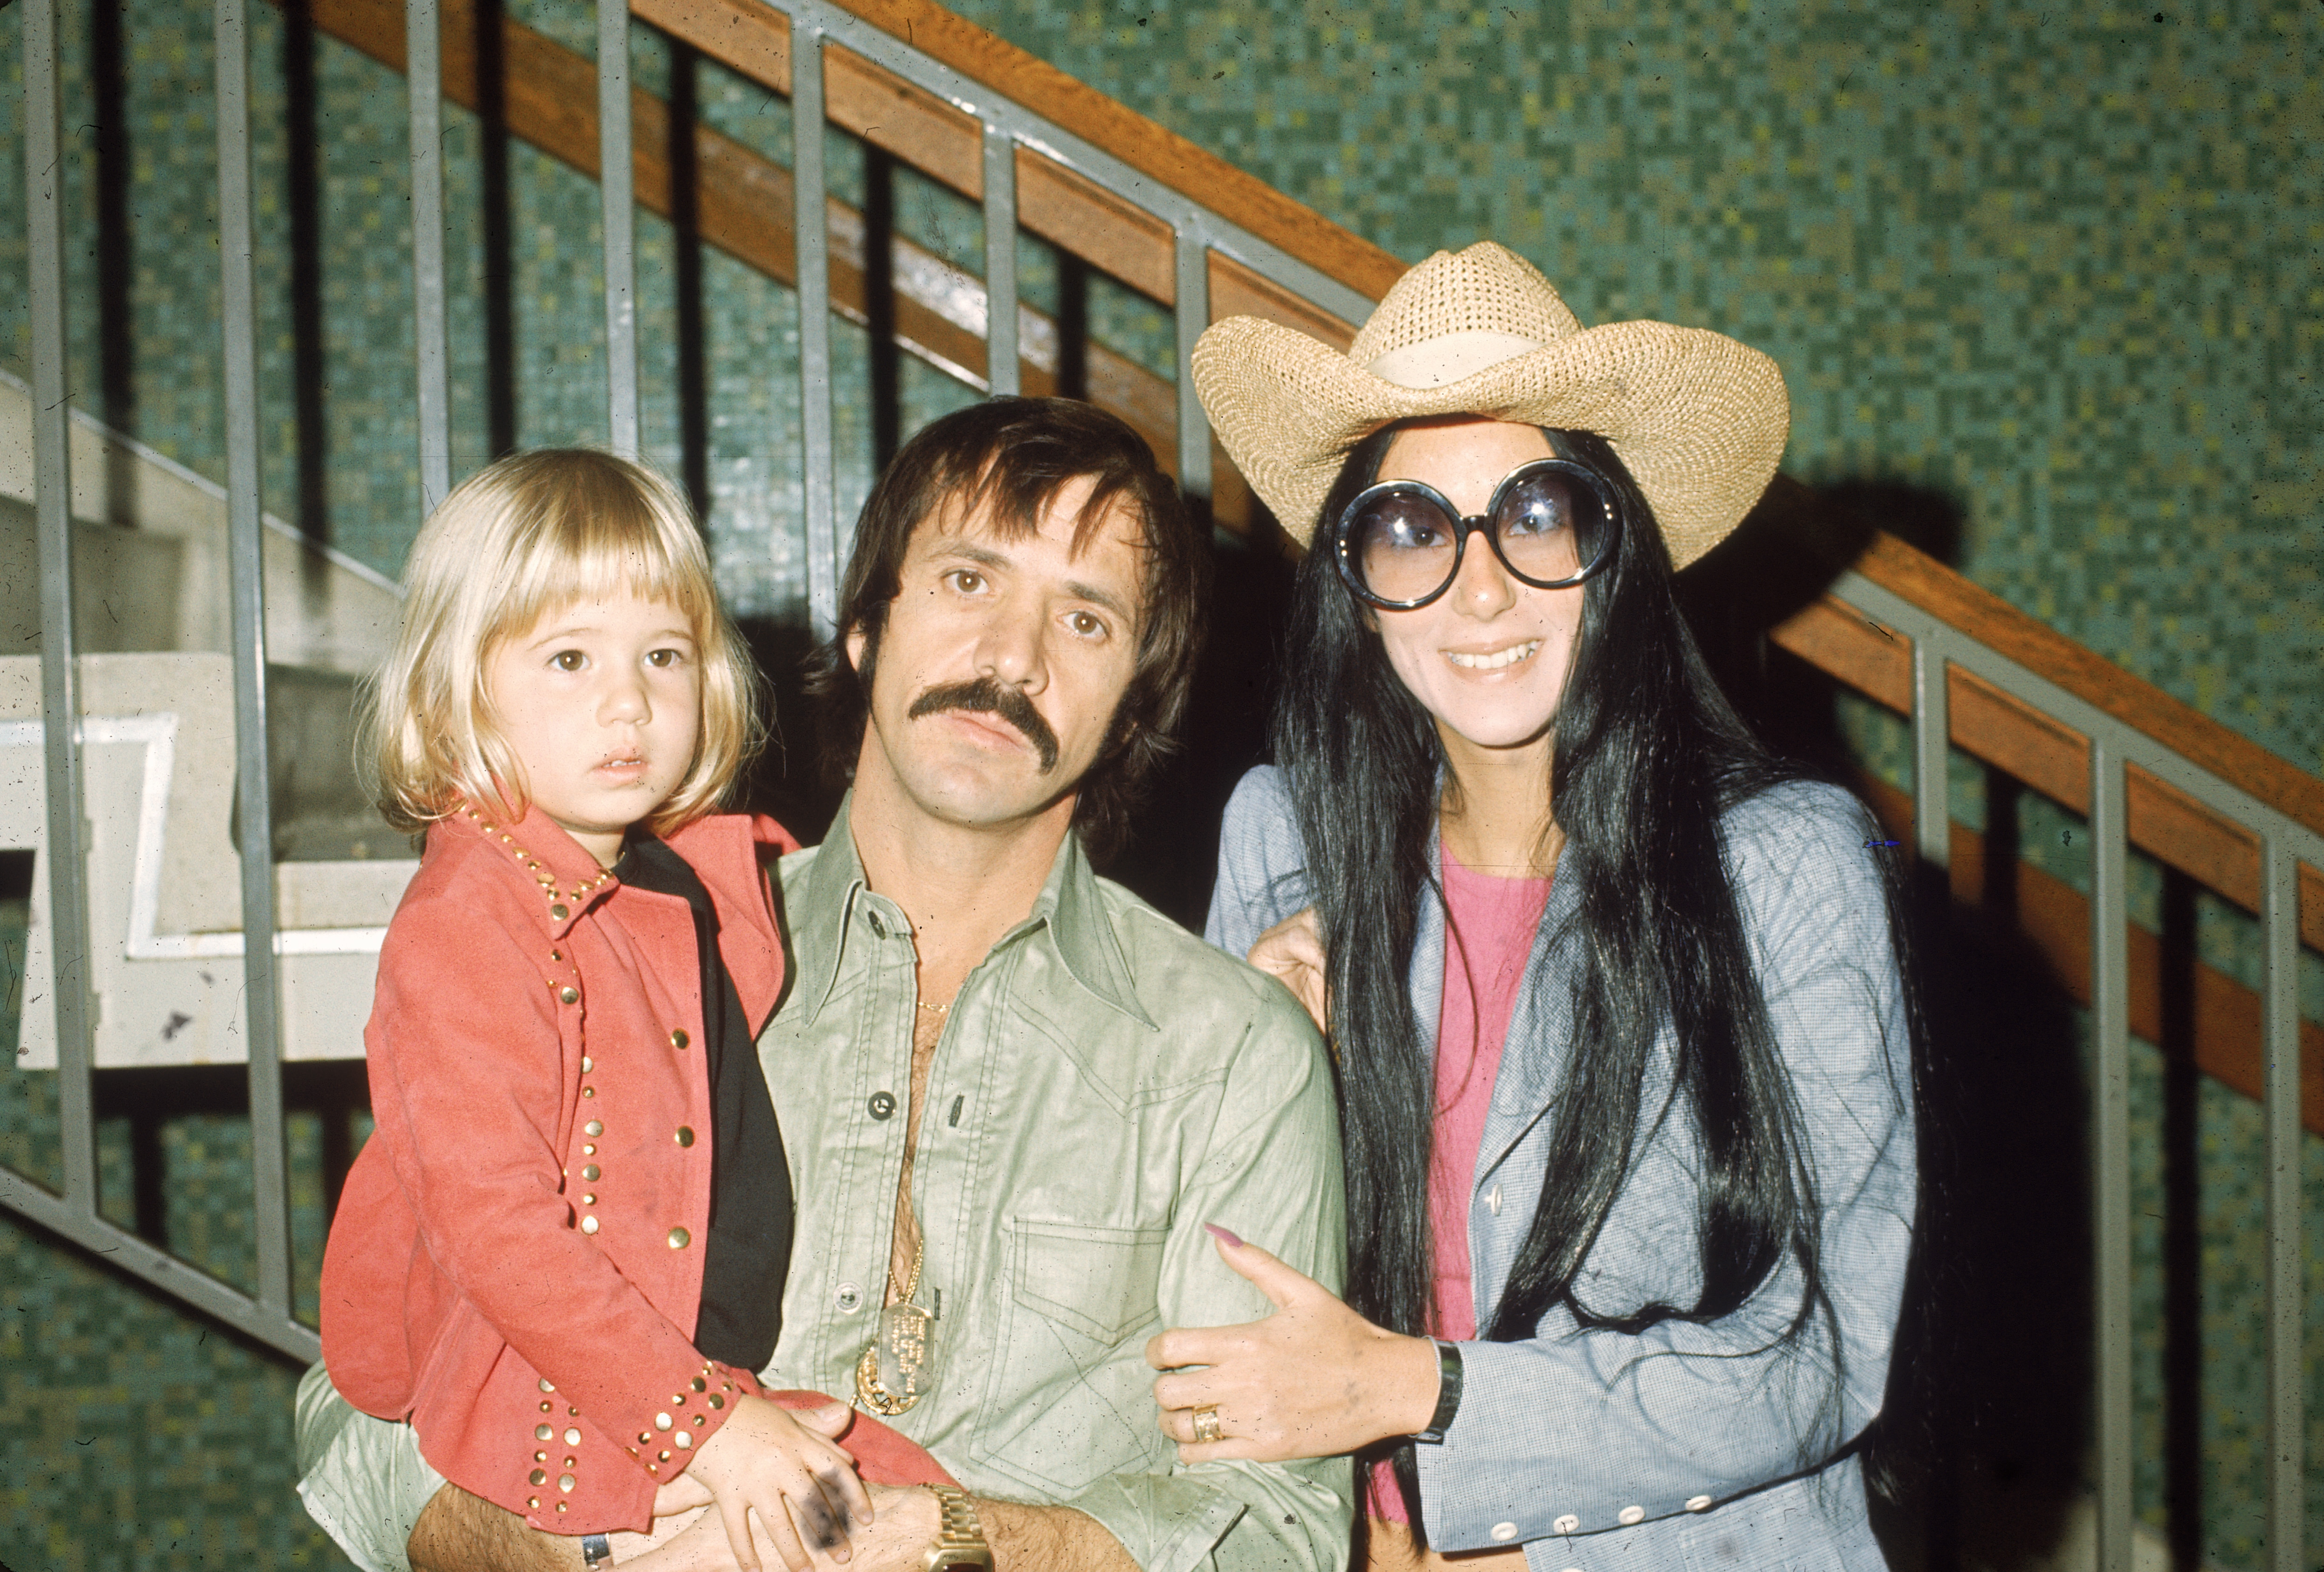 Sonny and Cher Bono pose with Chastity Bono in front of a staircase, on March 1, 1973. | Source: Getty Images